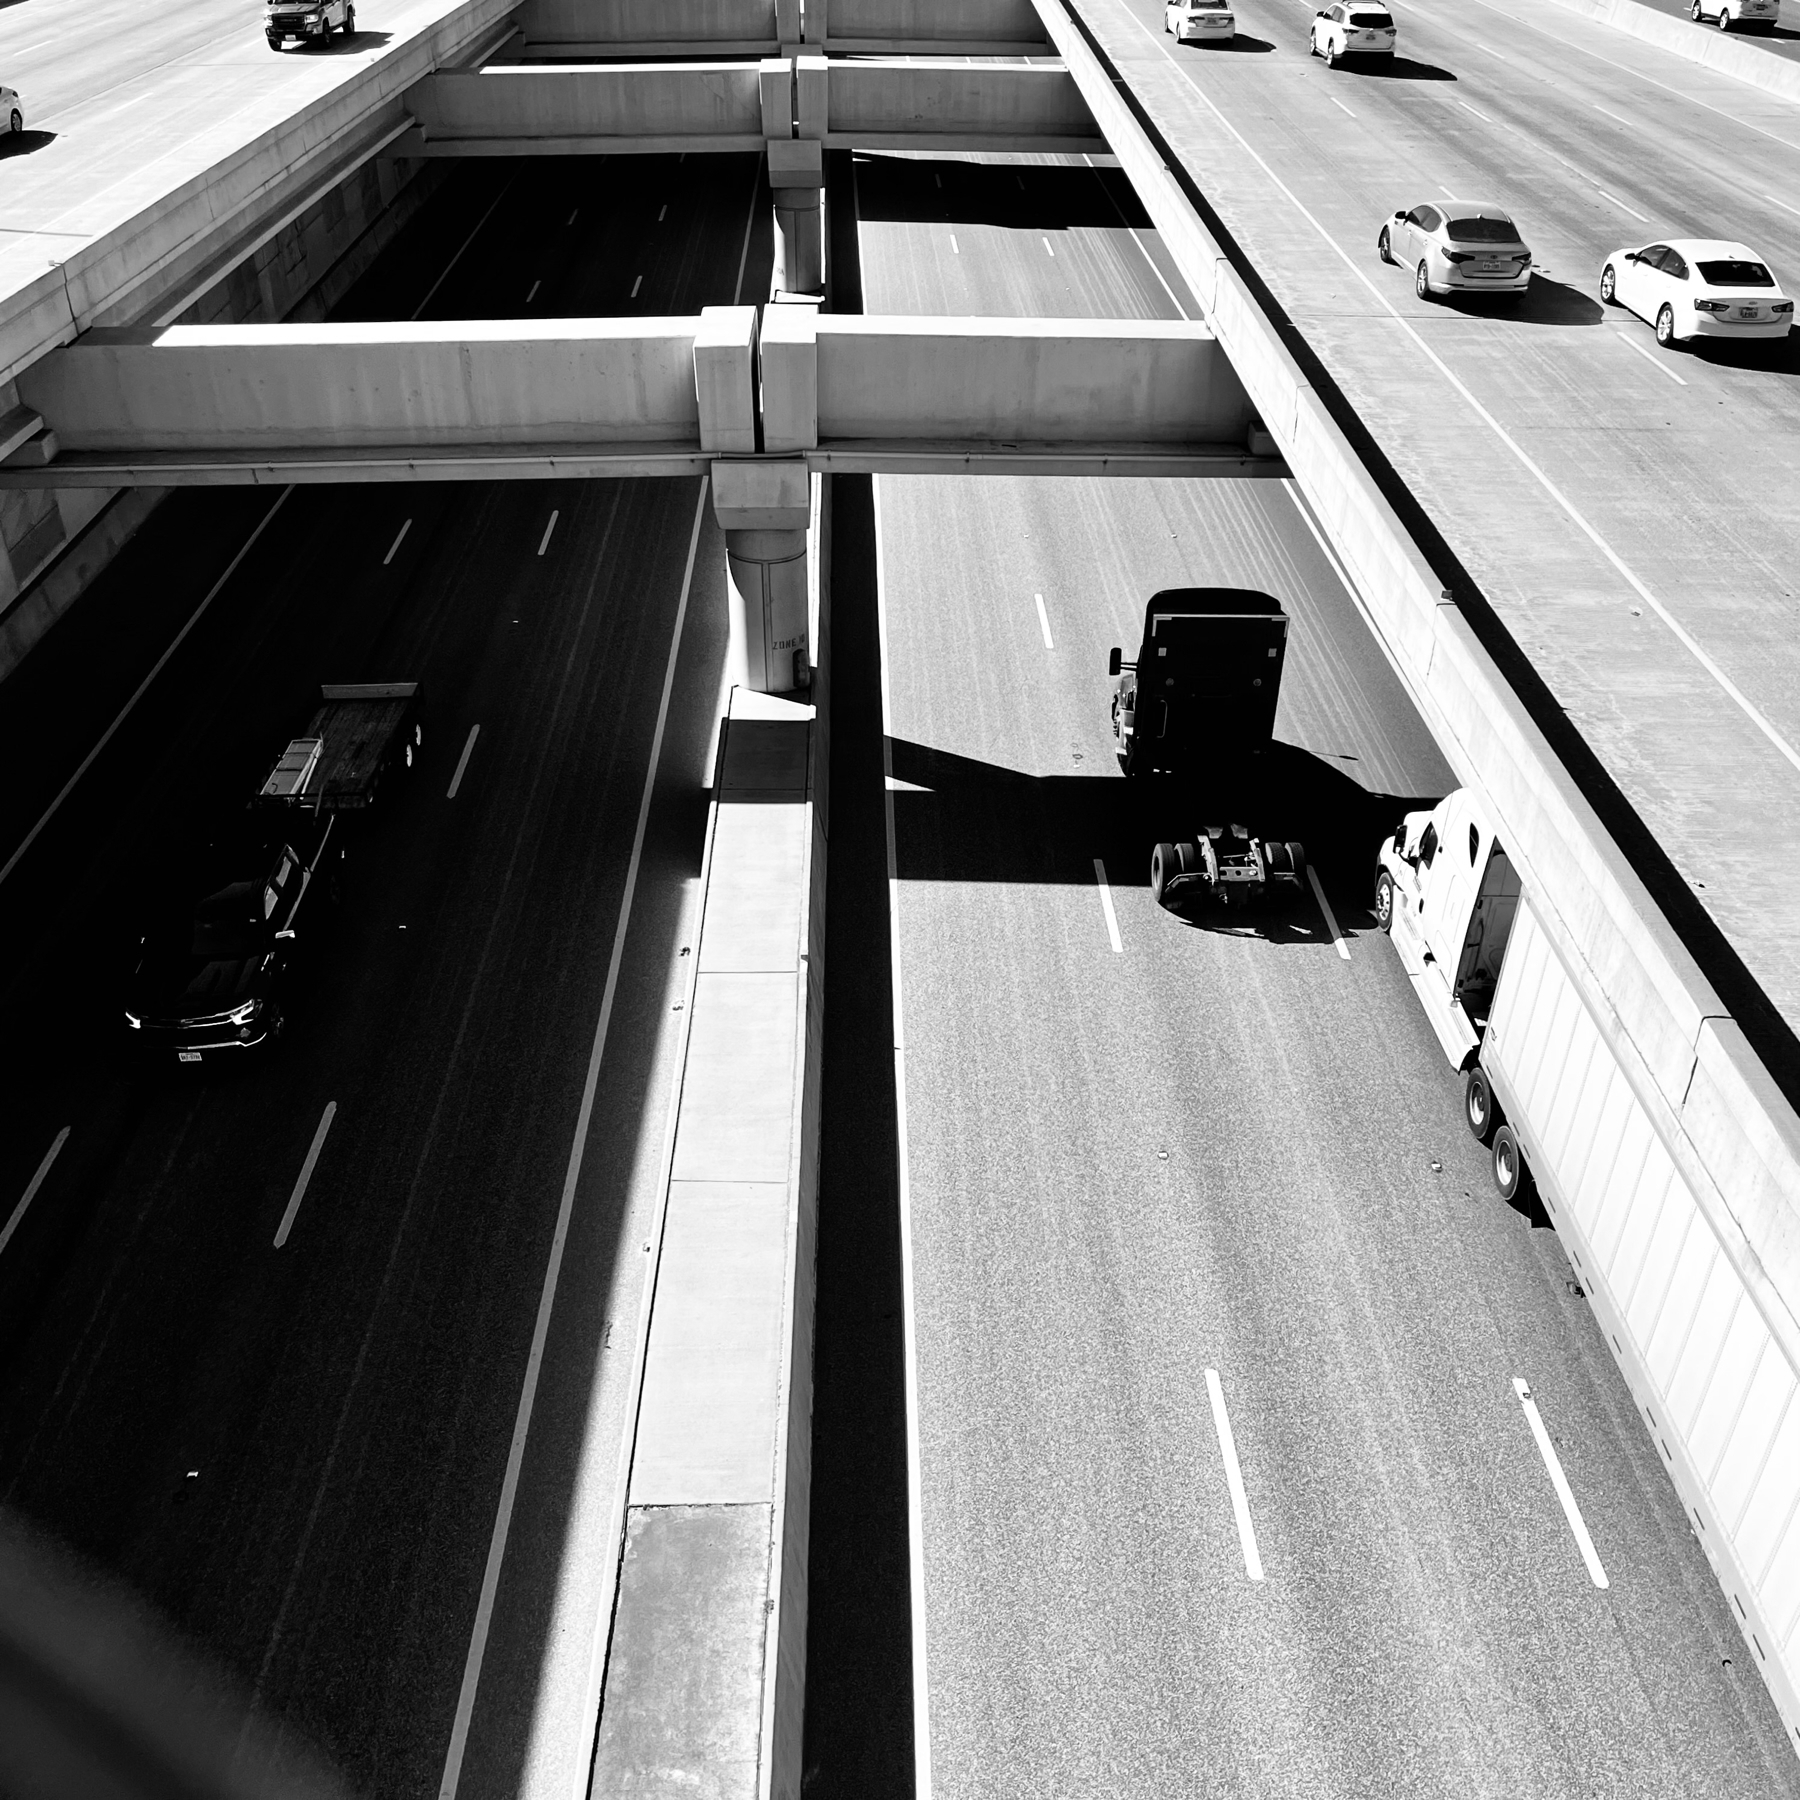 Black and white image of a multi-level highway system with cars and trucks driving on the sunlit roads, casting sharp shadows from the overhead structure